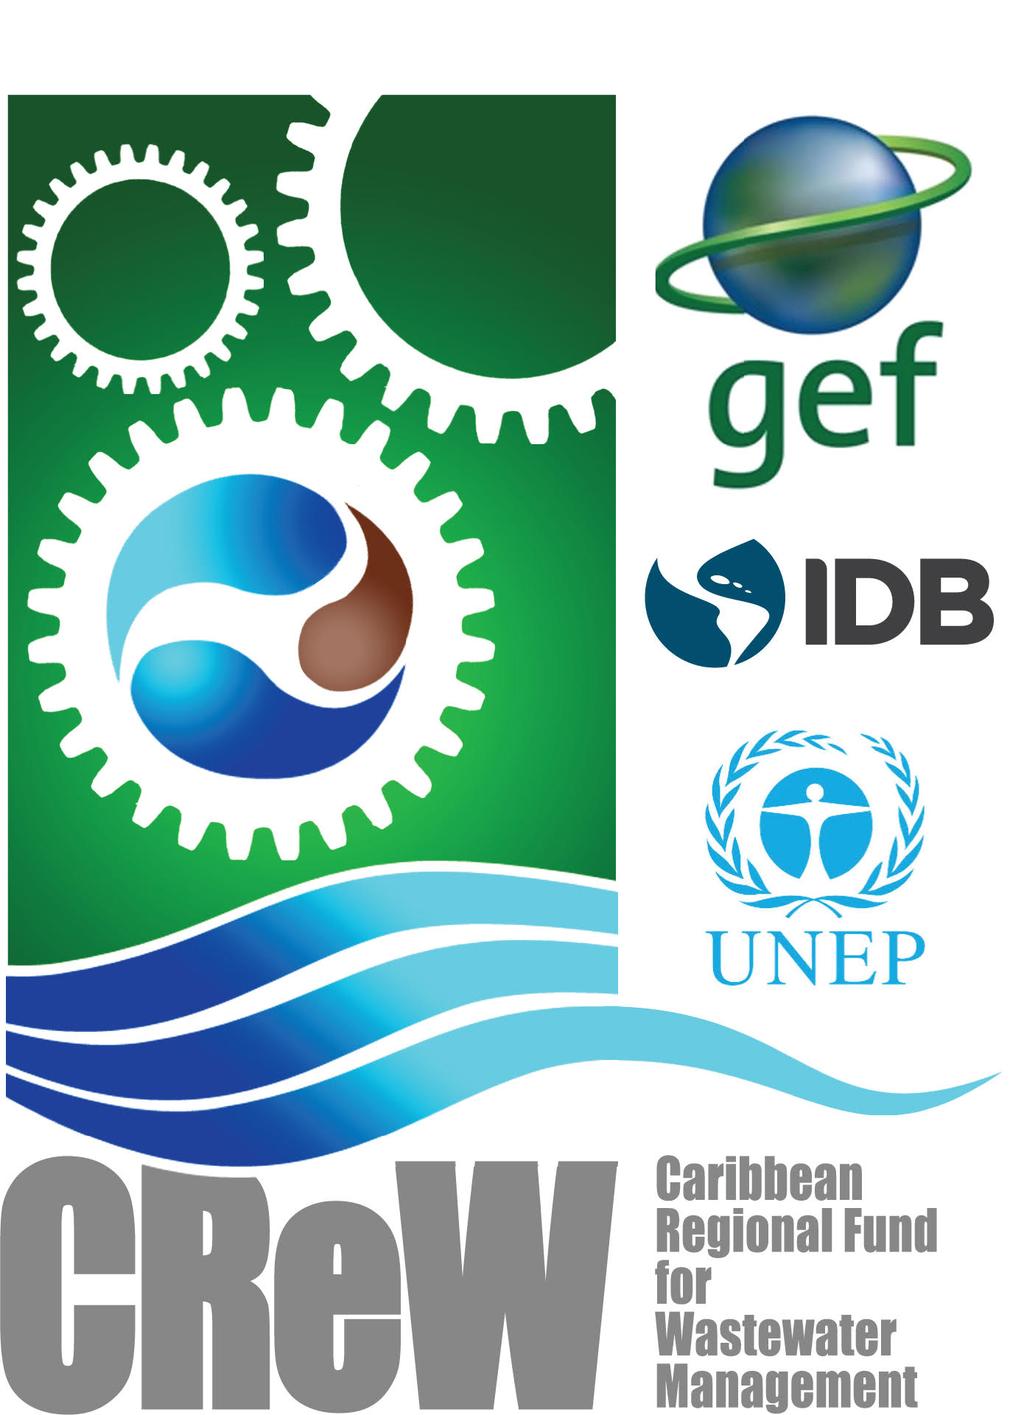 GEF CReW The Global Environment Facility-funded Caribbean Regional Fund for Wastewater Management (GEF CReW) Project convened its Final Regional Capacity Building Workshop from 15 19 February 2016 in